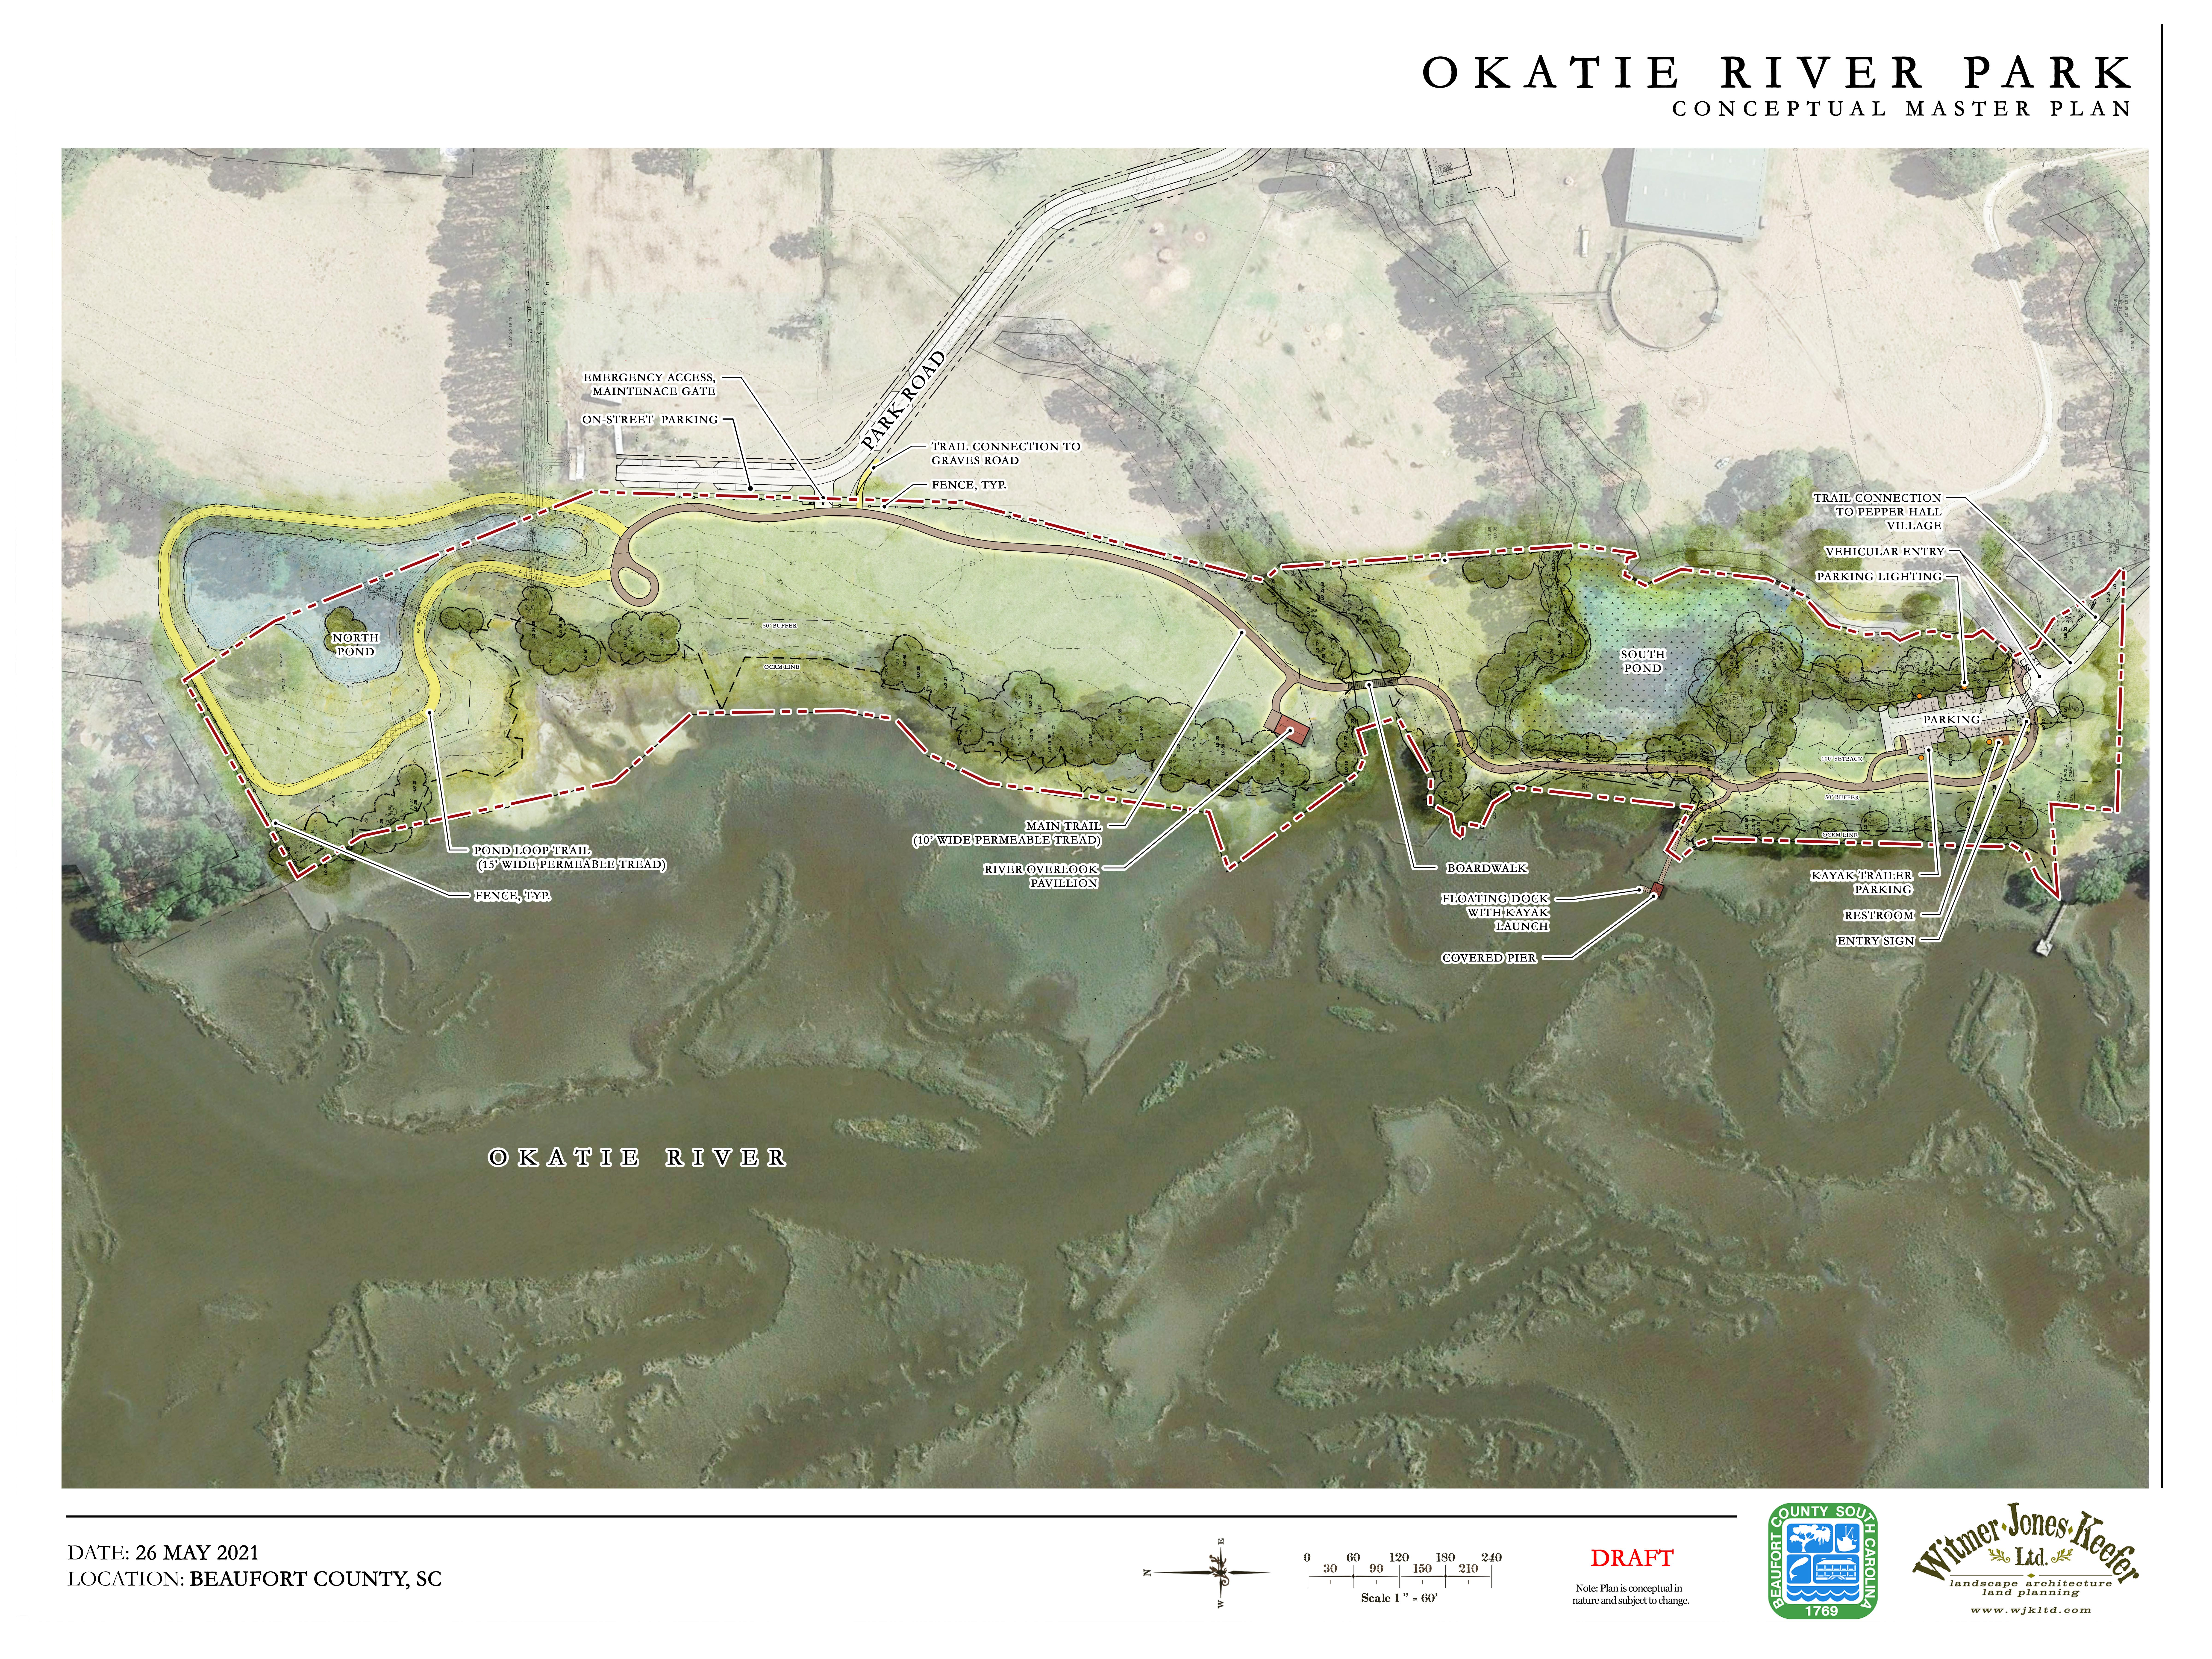 County Council Approves Funding for Infrastructure to Okatie River Park